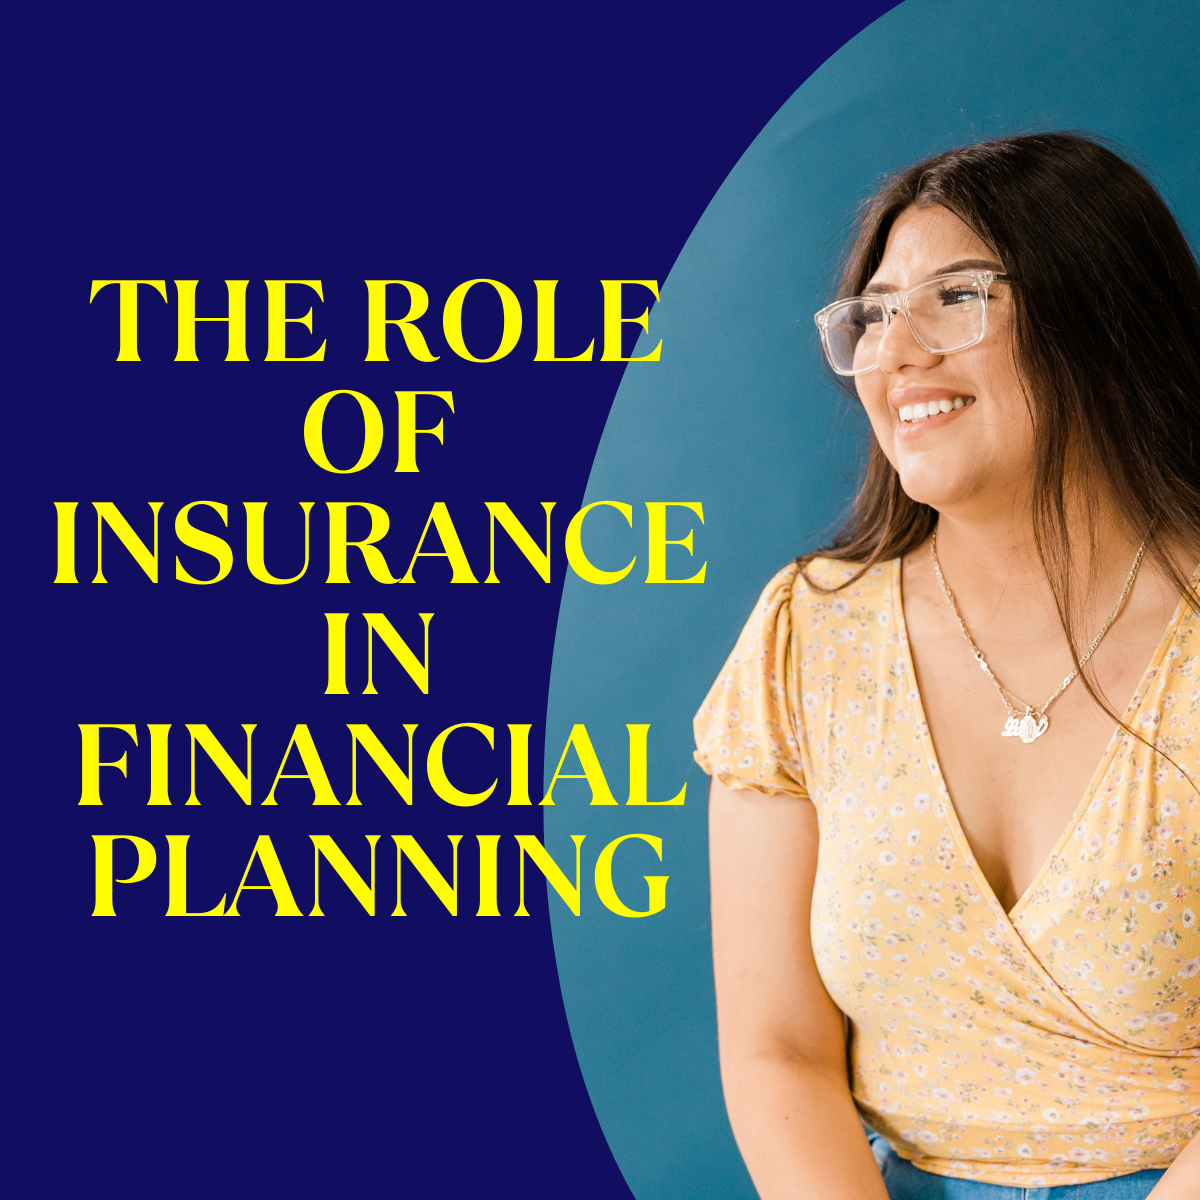 The Role of Insurance in Financial Planning